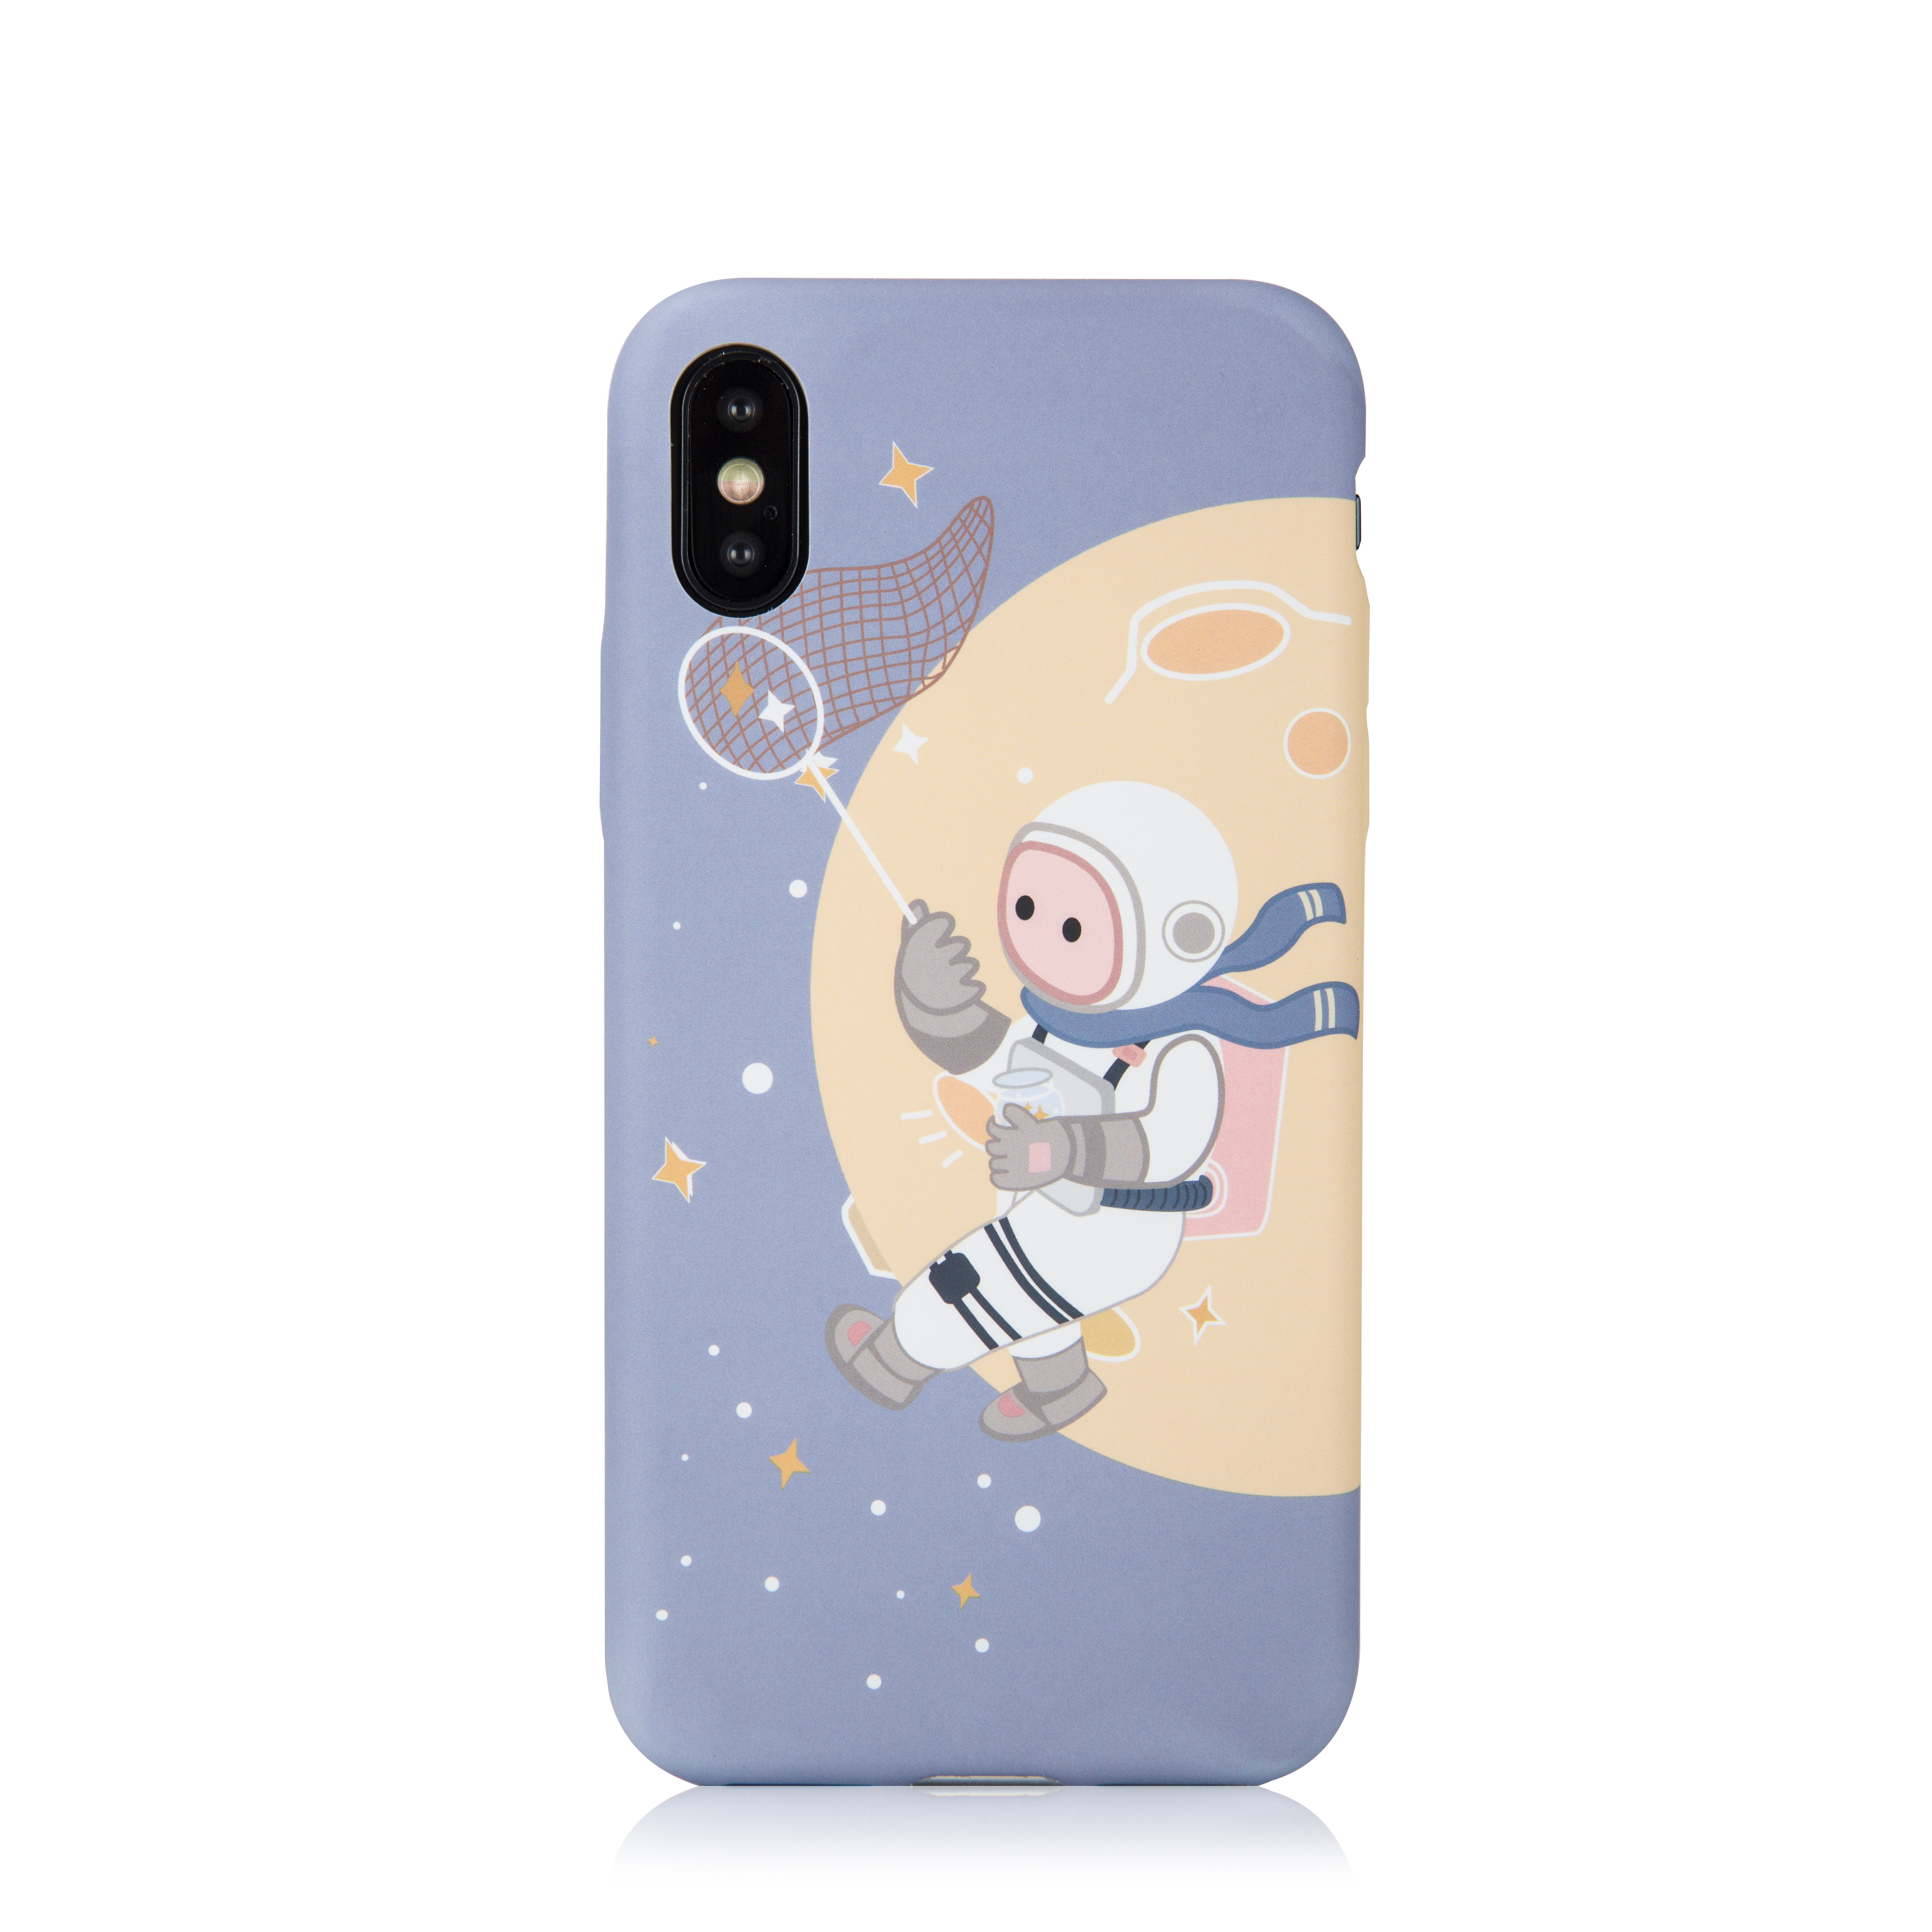 Primavox Fashionable Tinycosmos Series Phone Case For Iphone XR Protective Case Cover